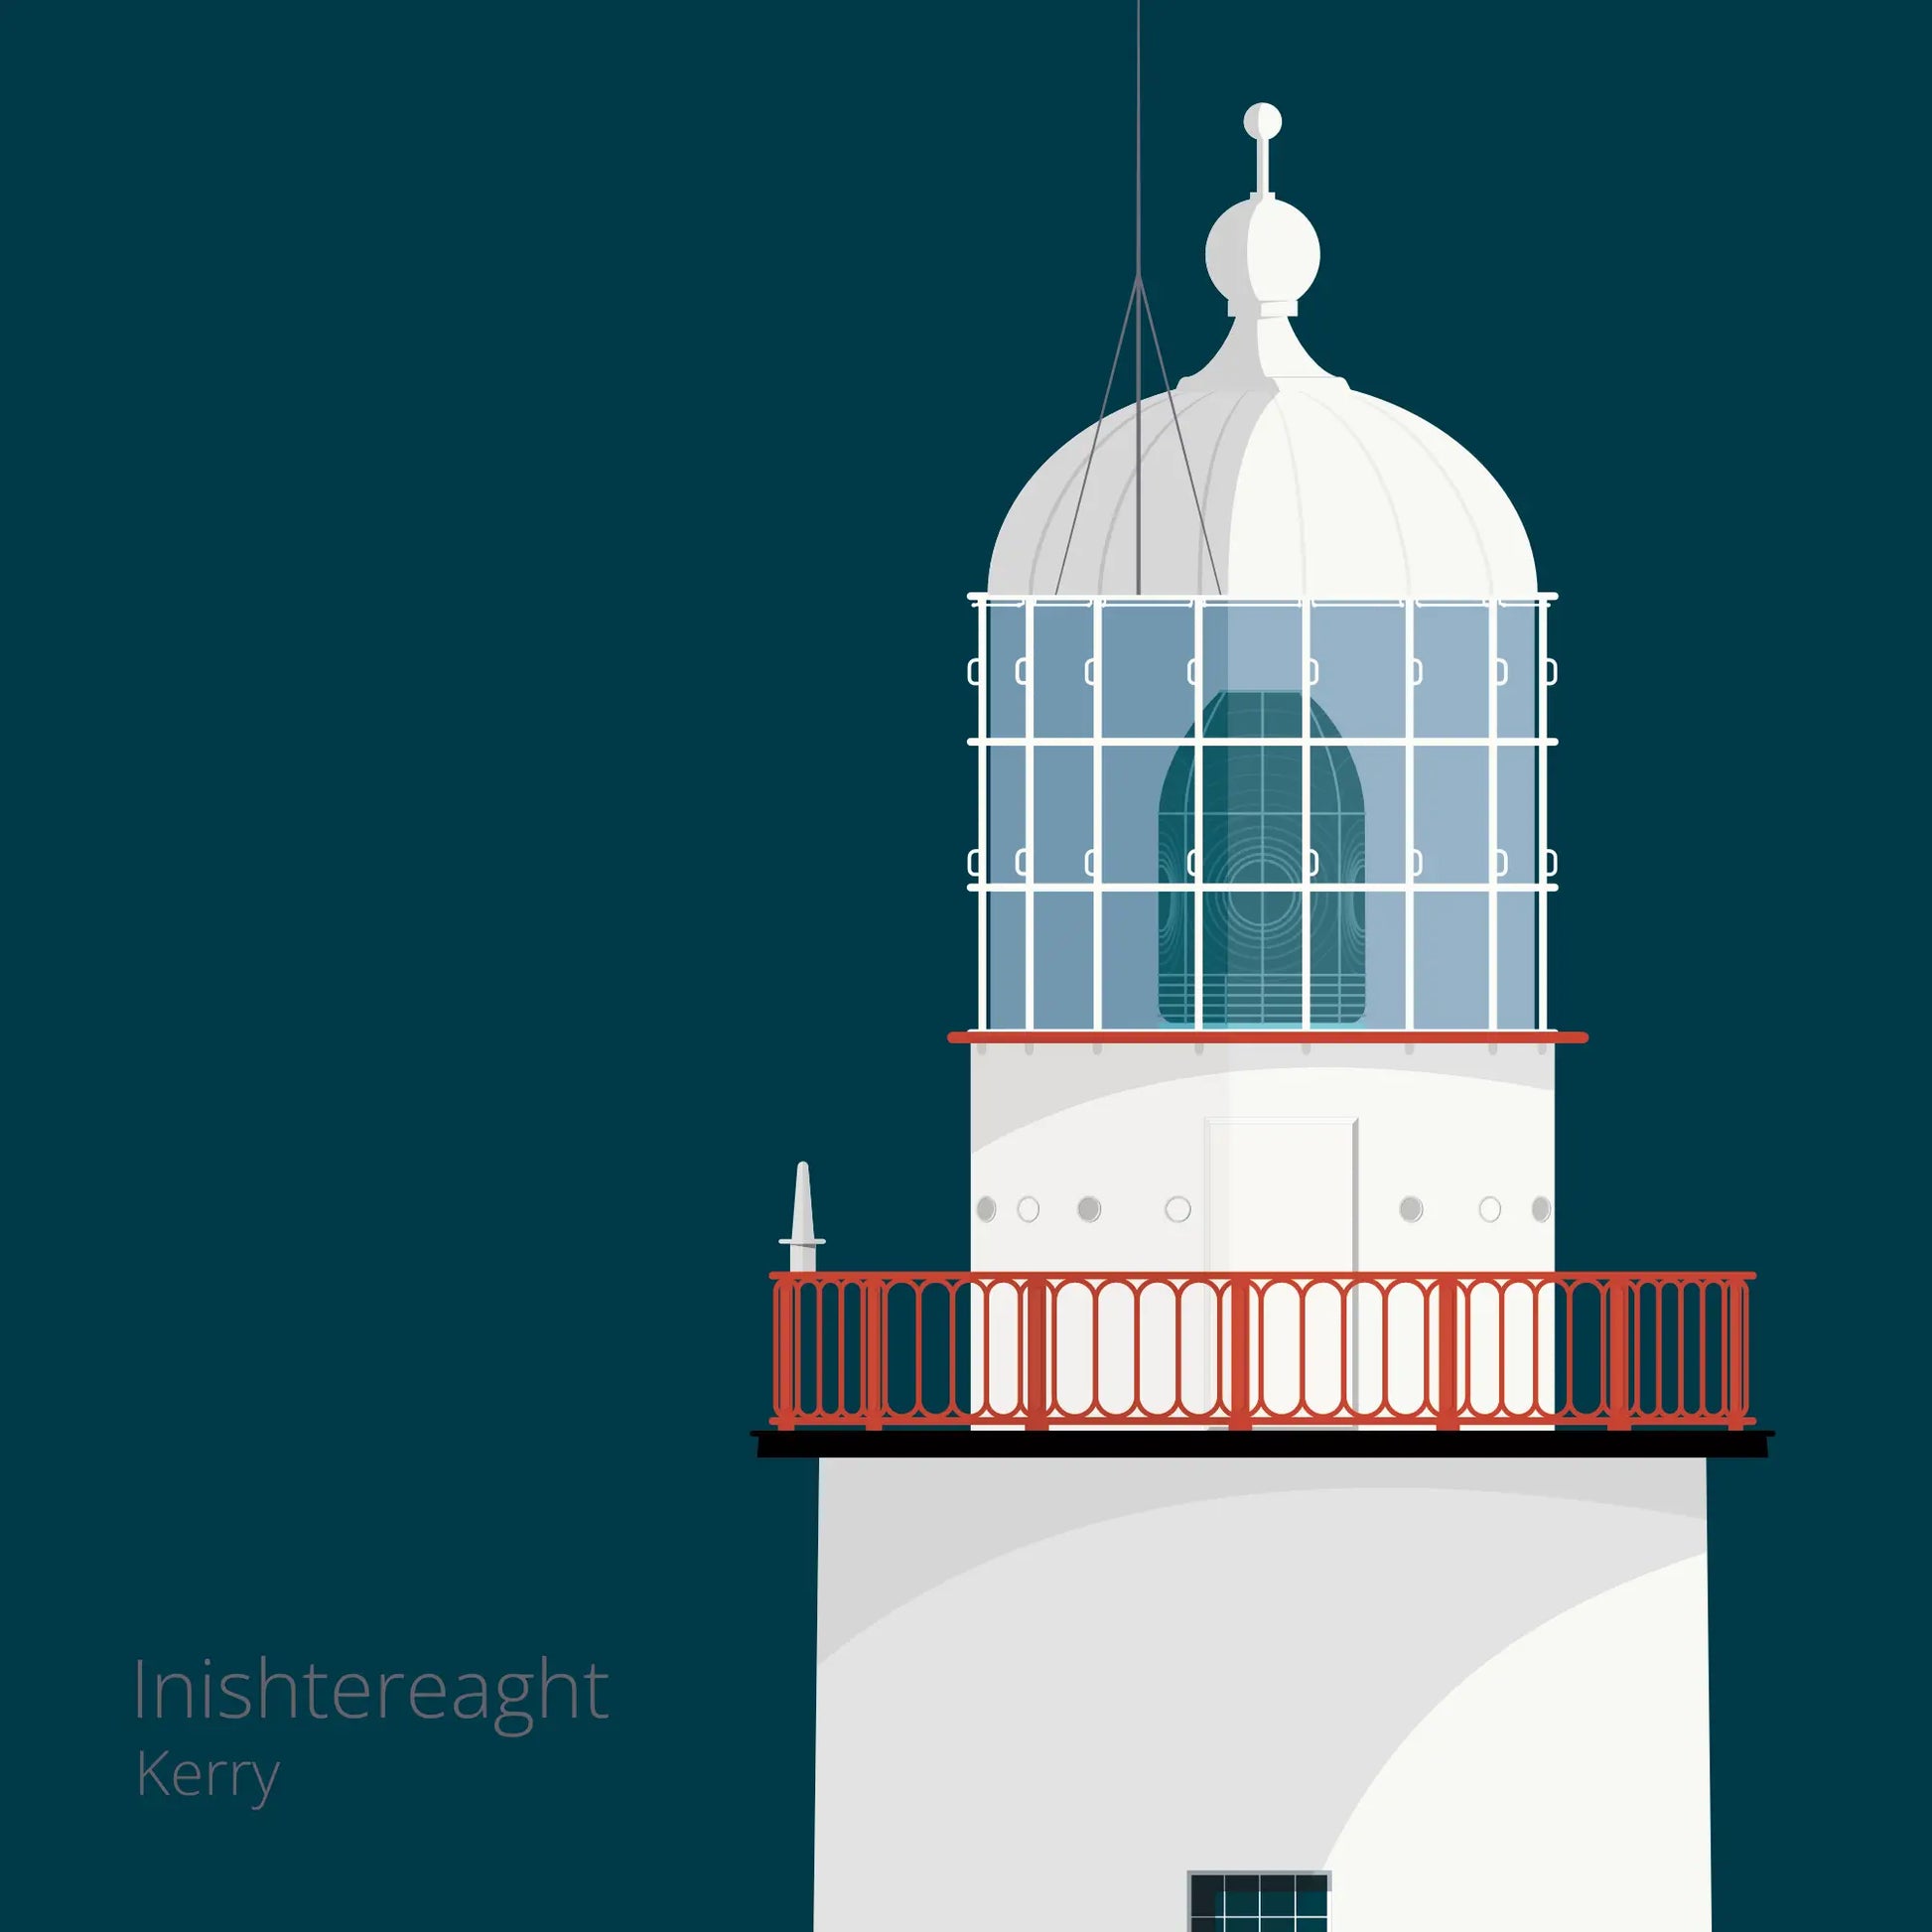 Illustration of Inistearaght lighthouse on a midnight blue background